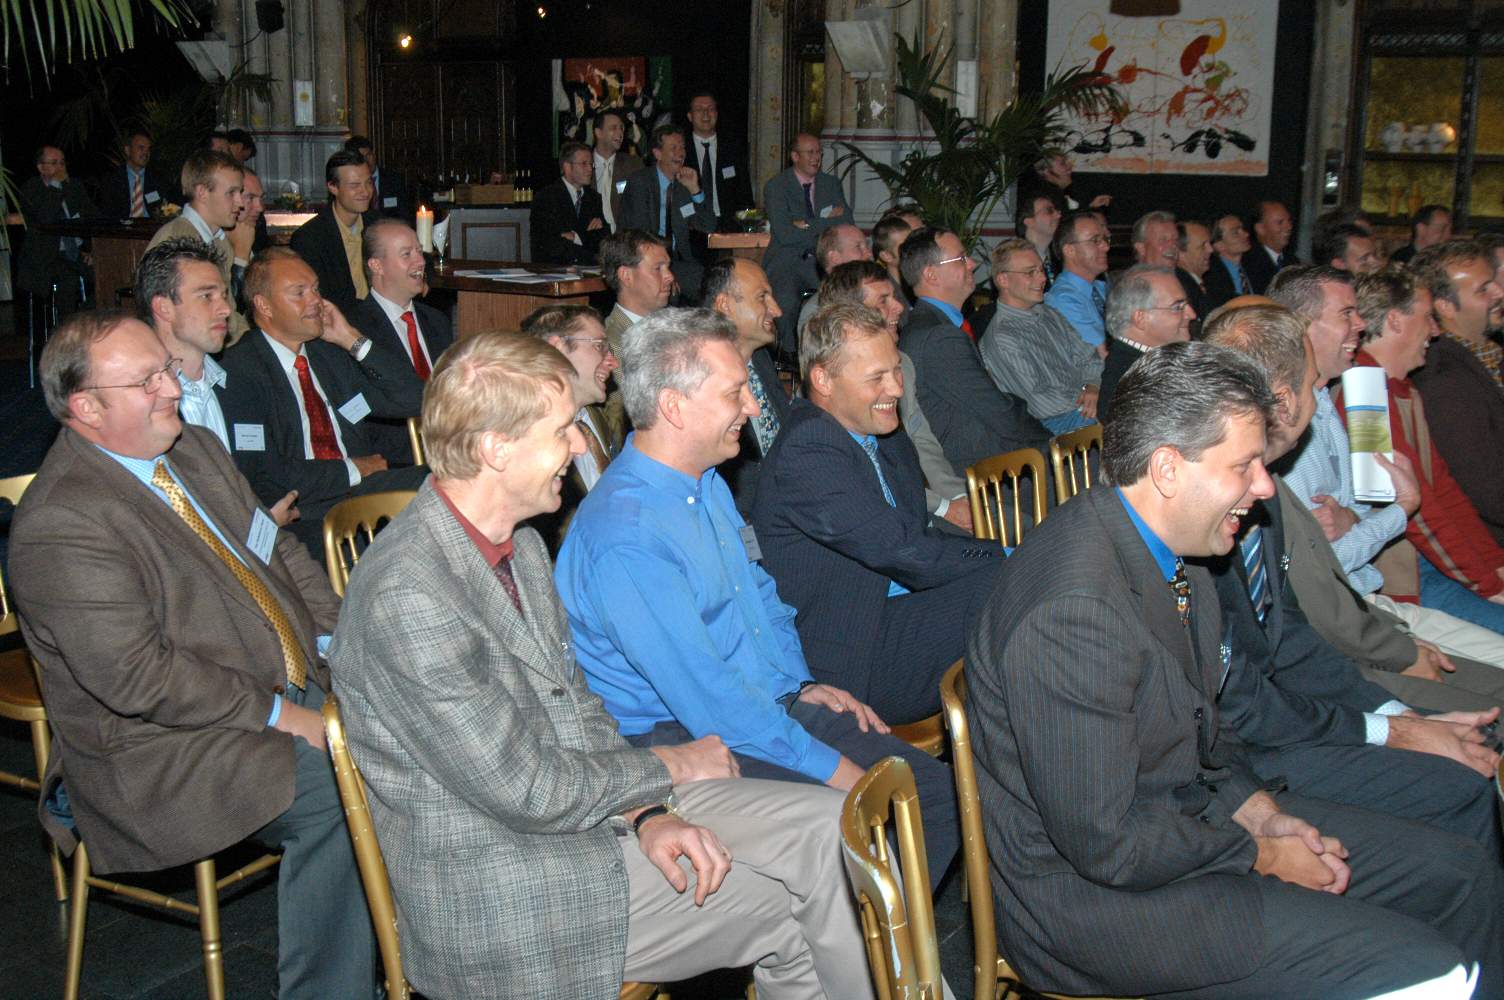 Compuware Customer Technology Briefing / Face 2 Face16 september 2004 - Orangerie Den BoschFoto door Erik van Roon
[#Beginning of Shooting Data Section]Nikon D100 
Focal Length: 28mm
White Balance: Auto
Color Mode: Mode I (sRGB)
2004/09/16 15:32:53.8
Exposure Mode: Aperture Priority
AF Mode: AF-S
Hue Adjustment: 0°
JPEG (8-bit) Fine
Metering Mode: Center-Weighted
Tone Comp: Auto
Sharpening: Auto
Image Size:  Large (3008 x 2000)
1/60 sec - f/6.3
Flash Sync Mode: Front Curtain
Noise Reduction: OFF
Exposure Comp.: 0 EV
Auto Flash Mode: D-TTL
Image Comment:                                     
[#End of Shooting Data Section]